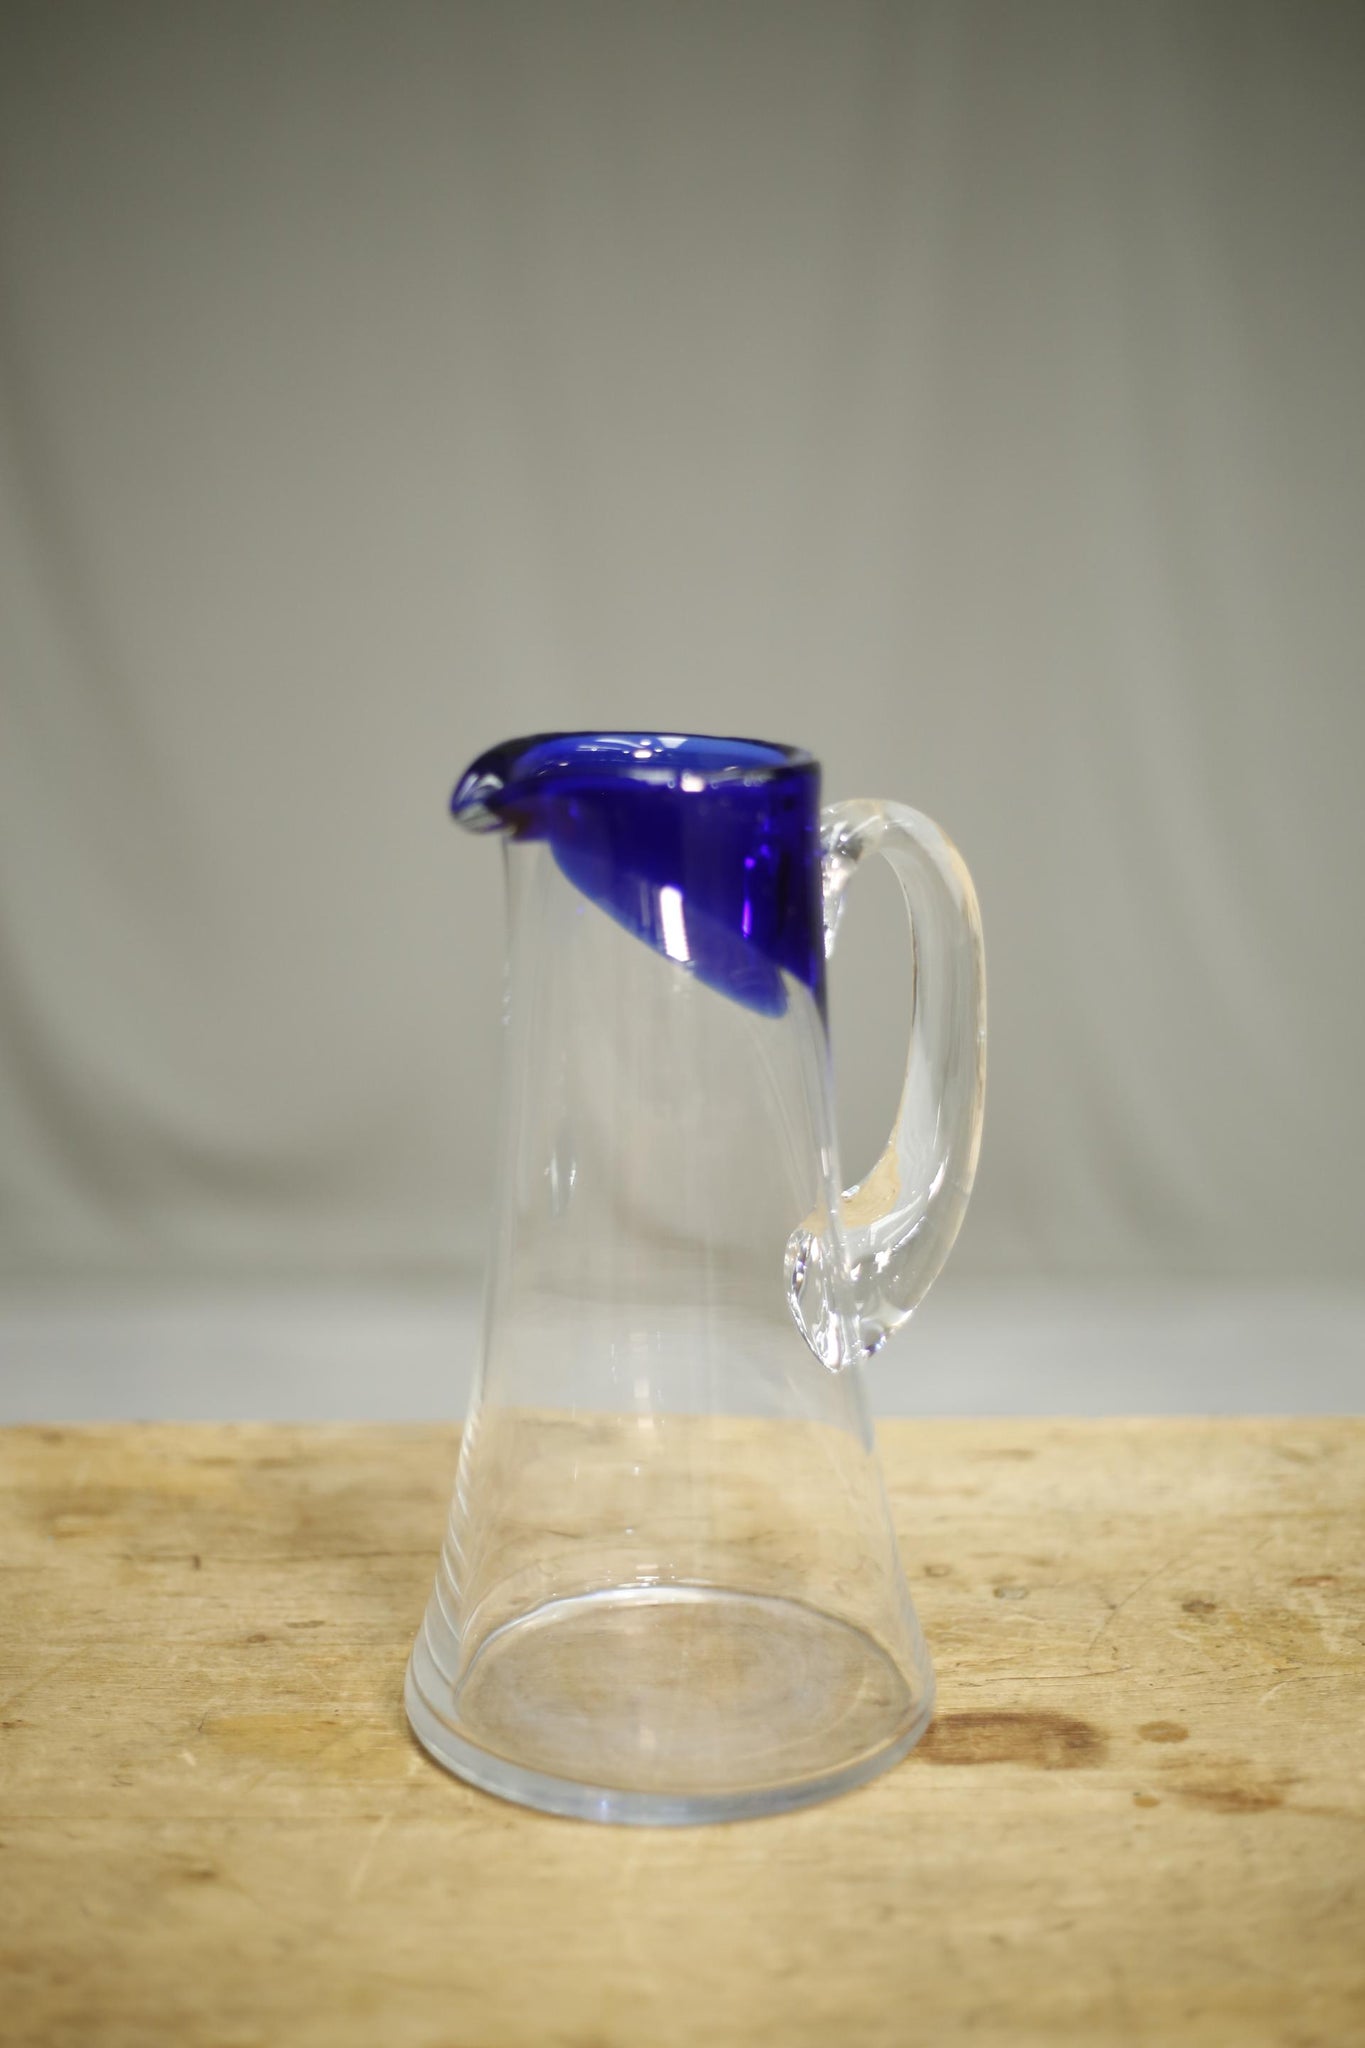 20th century clear glass jug with blue decoration